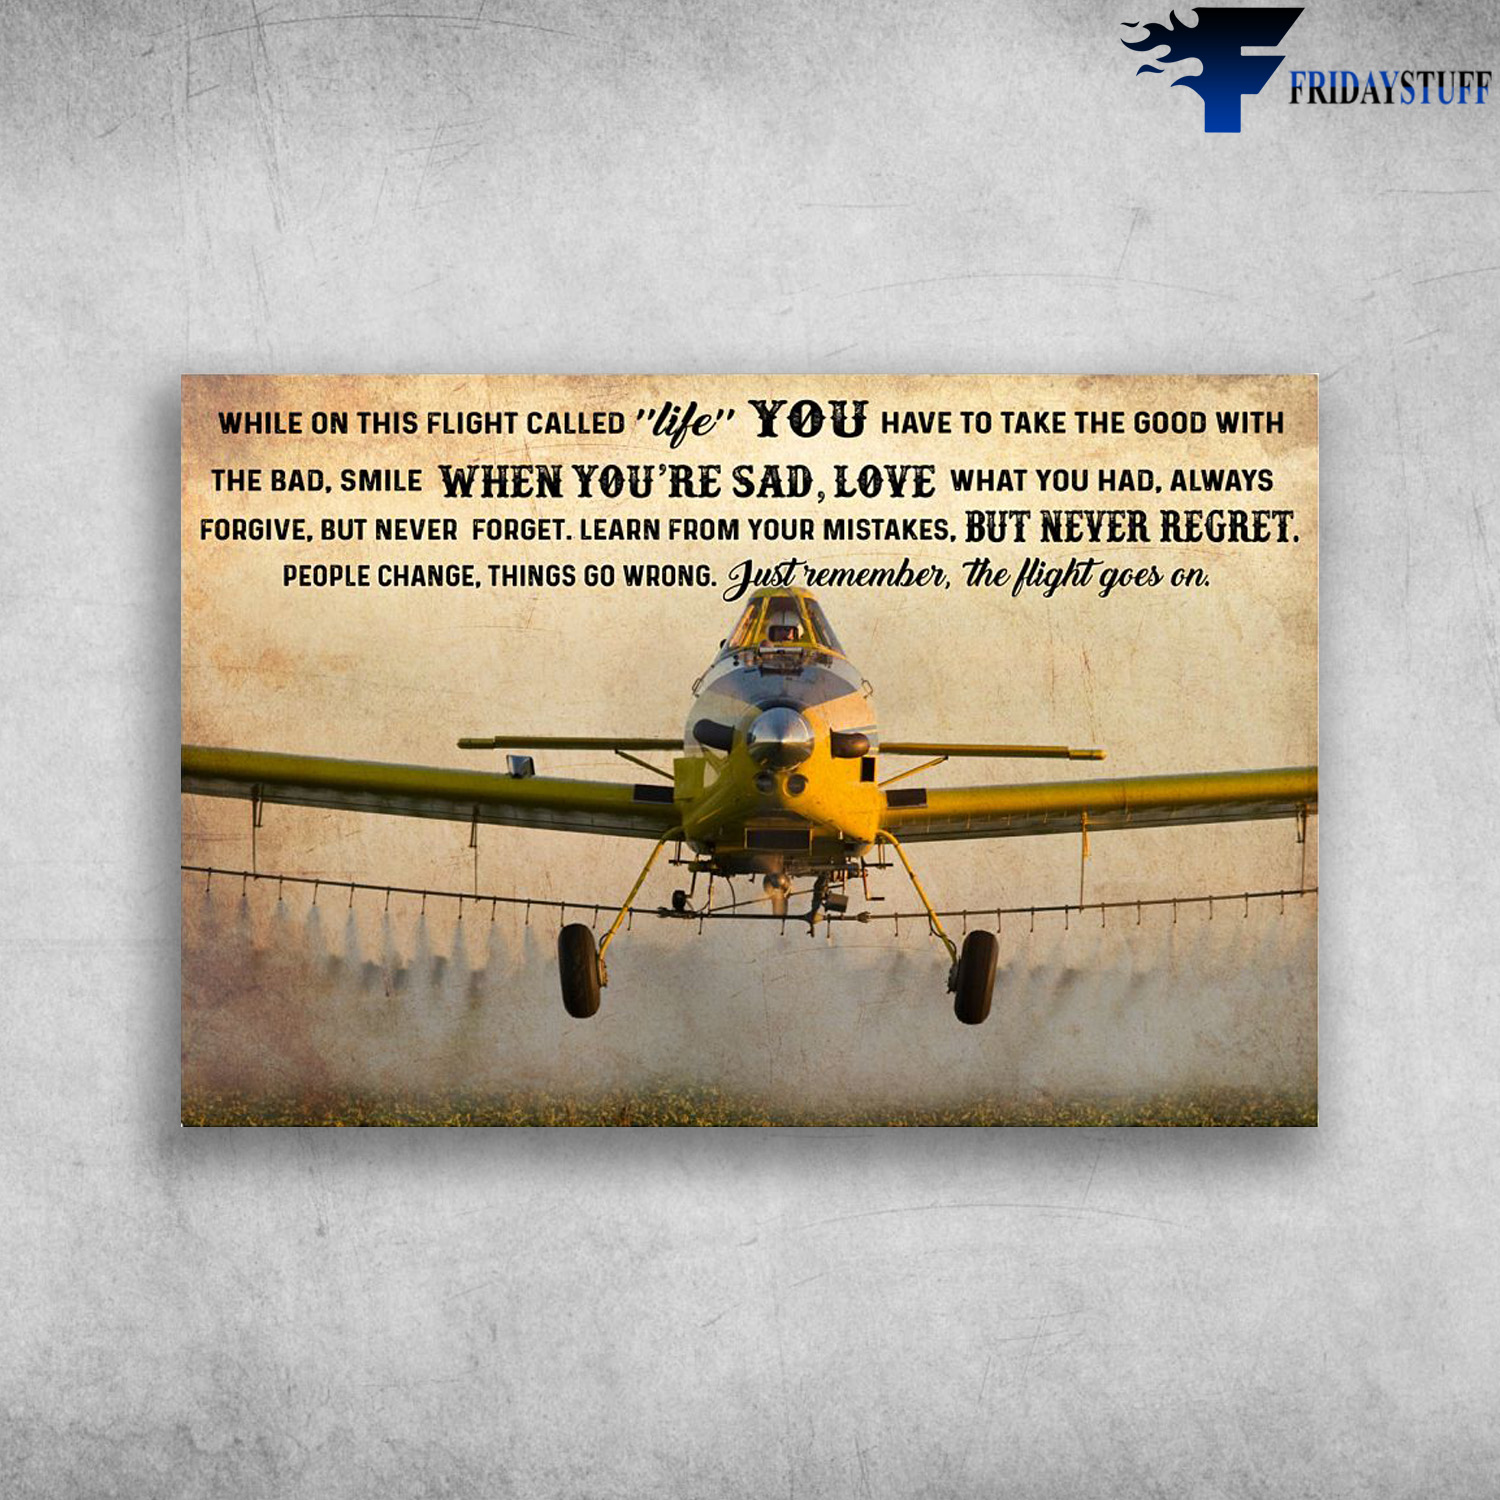 Crop Duster - While On This Flight Life, You Have To Take The Good With The Bad, Smile When You're Sad, Love What You Had, Always Forgive, But Never Gorget, Learn From Your Mistakes, But Never Reget, Peple Change